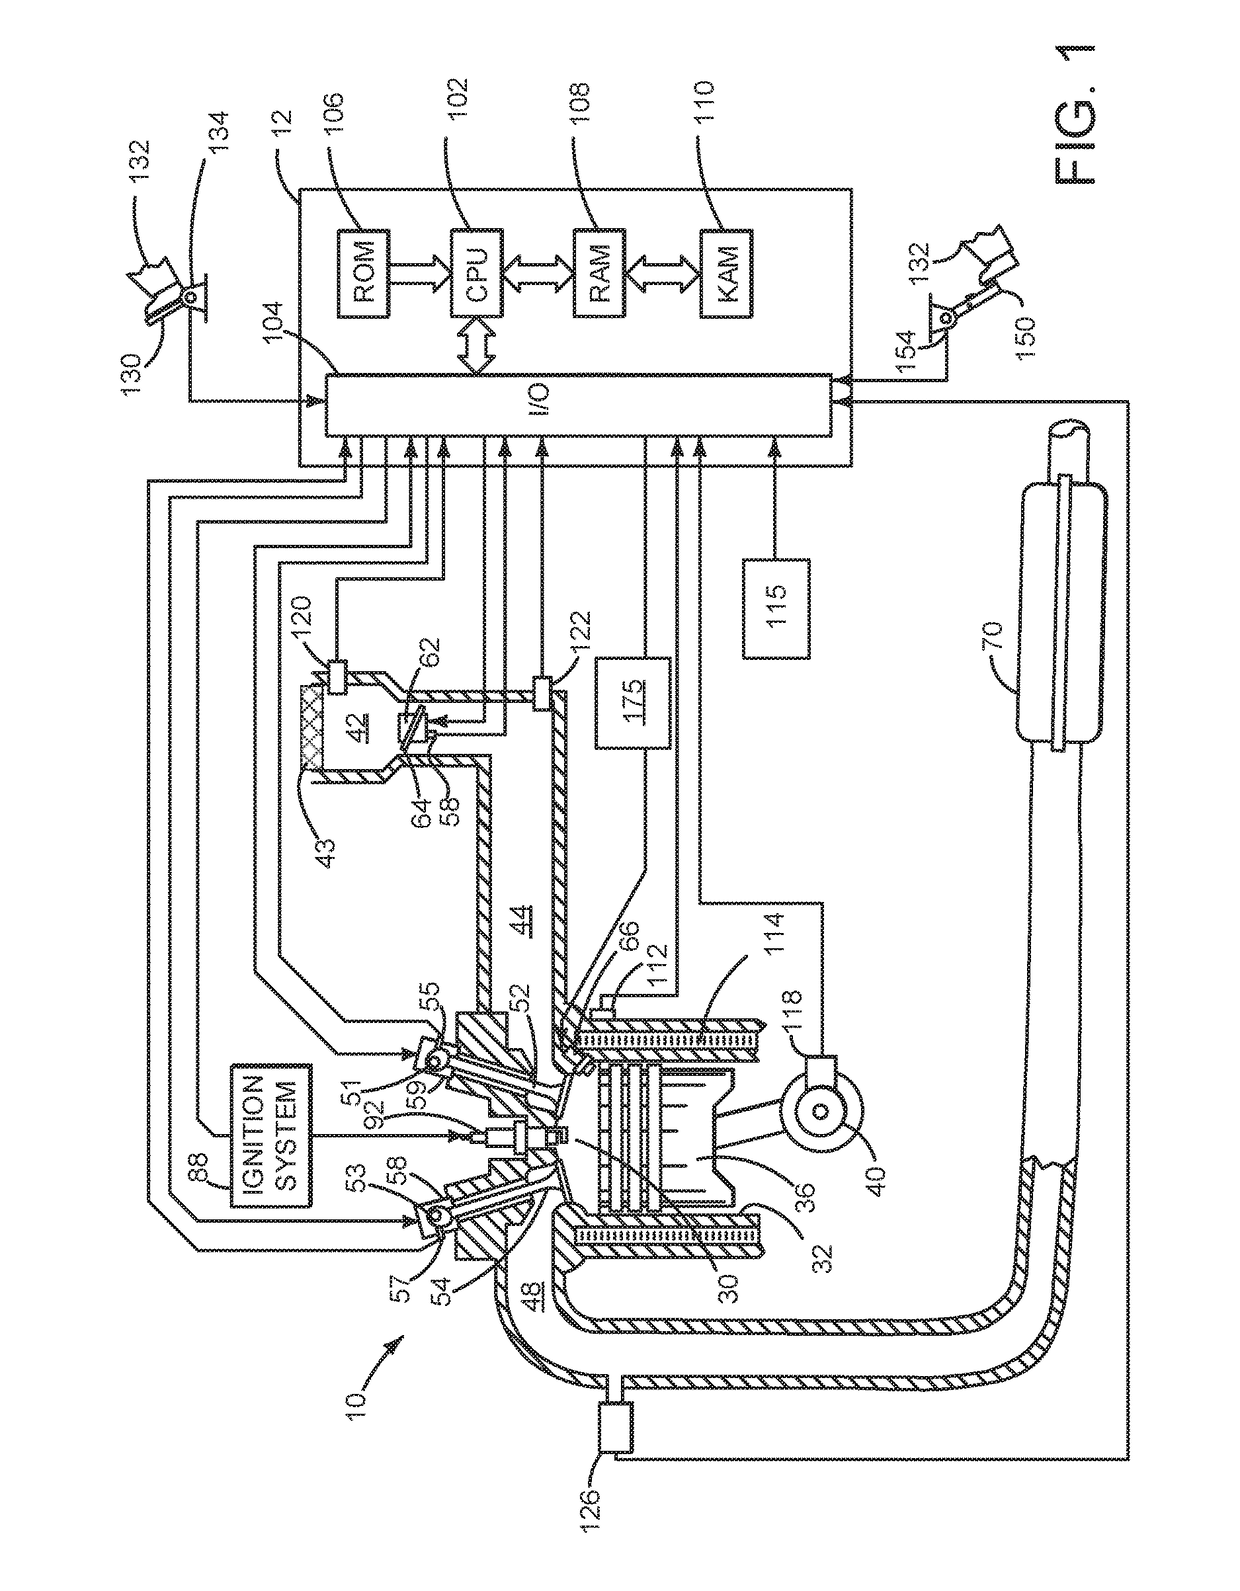 Variable displacement engine control